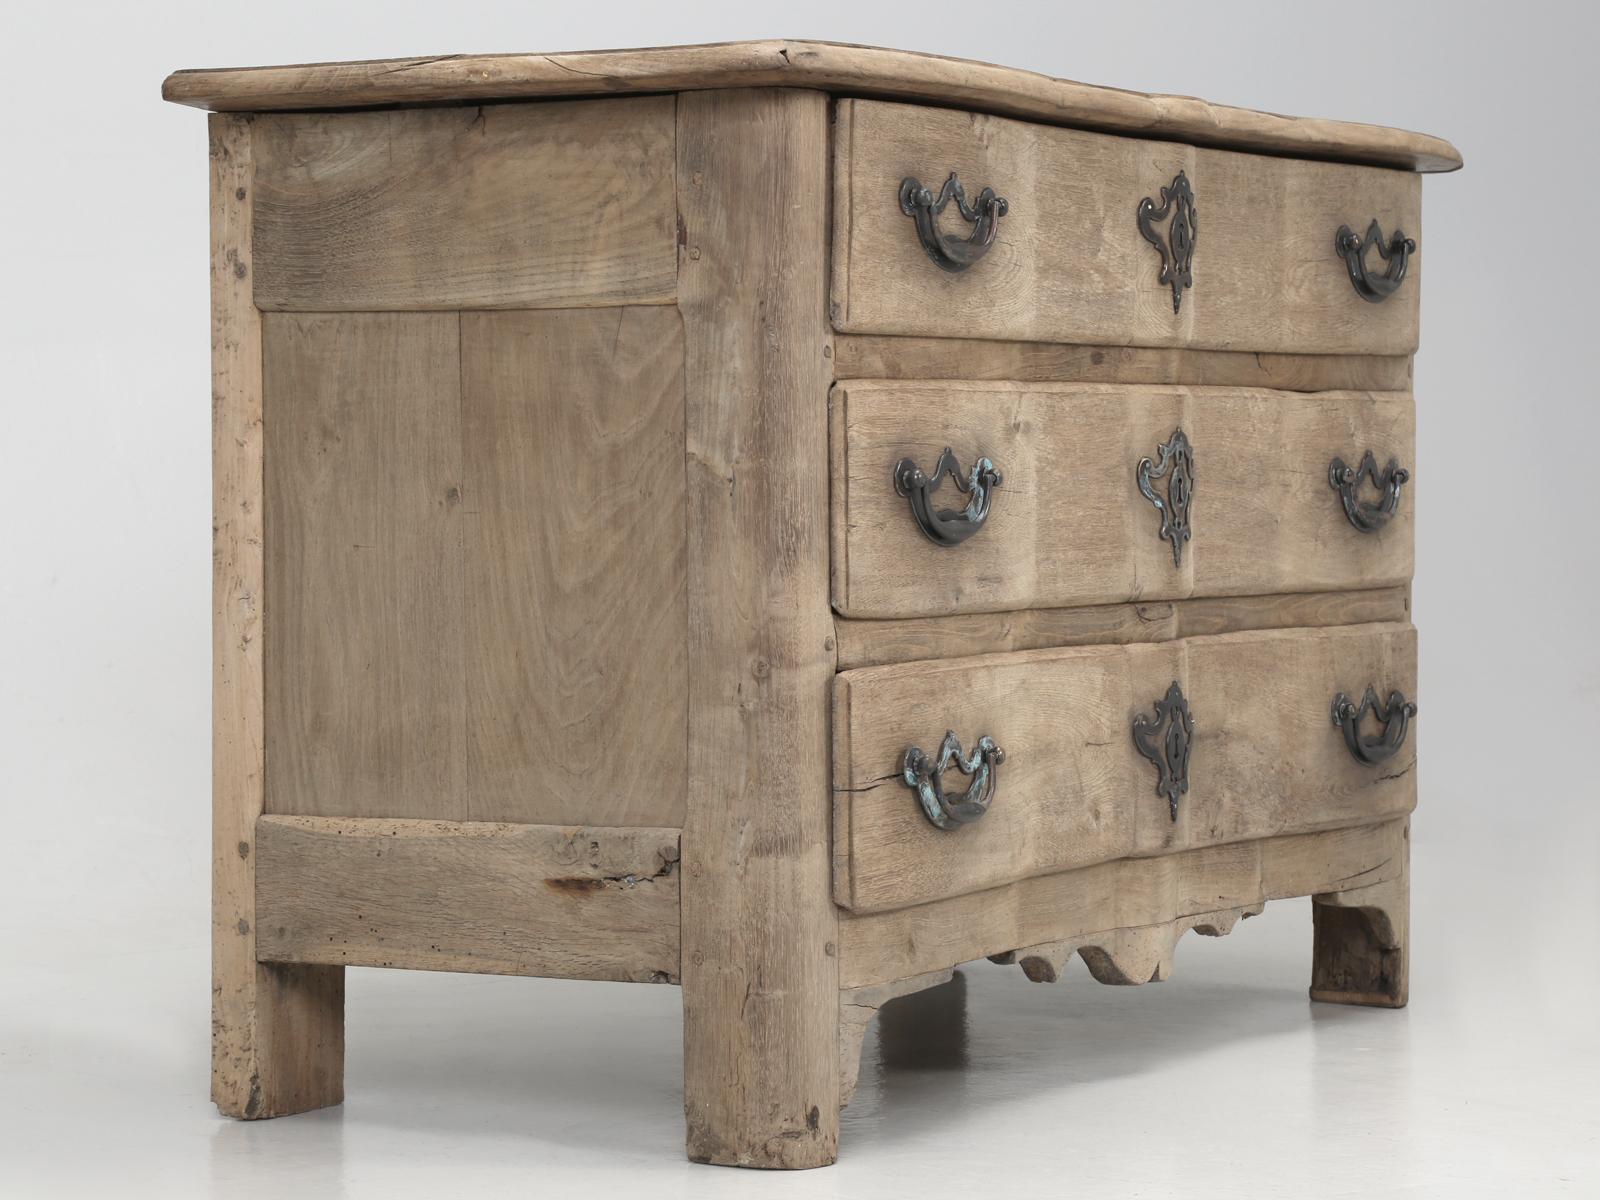 Antique French white oak dresser, chest of drawers or commode. Beautifully shaped with a serpentine front and a terrific, shall we say, lack of any finish? This particular antique French commode, appears to have been stripped of any finish a long